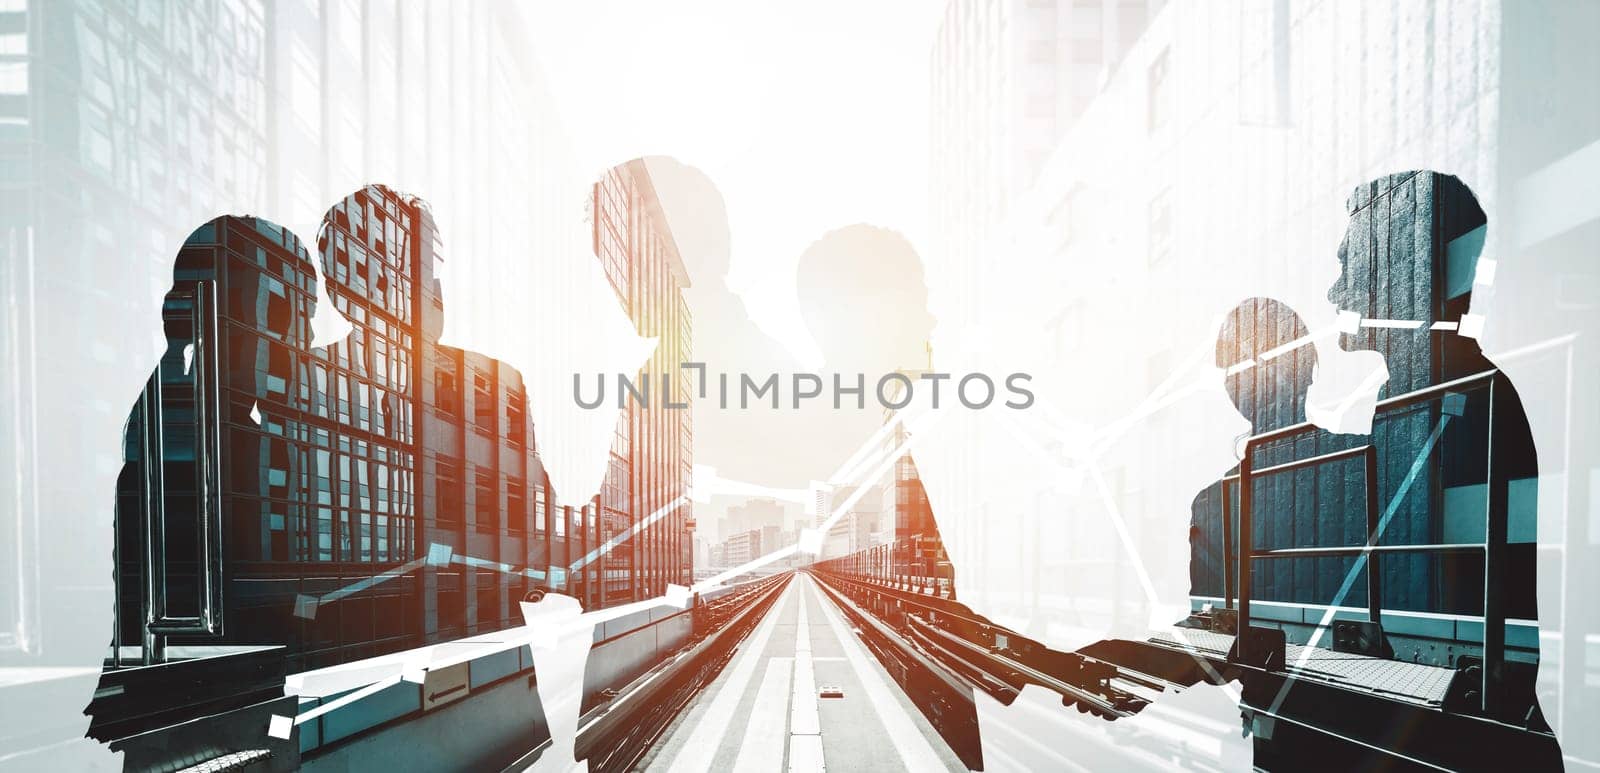 Double Exposure Image of Many Business People. uds by biancoblue